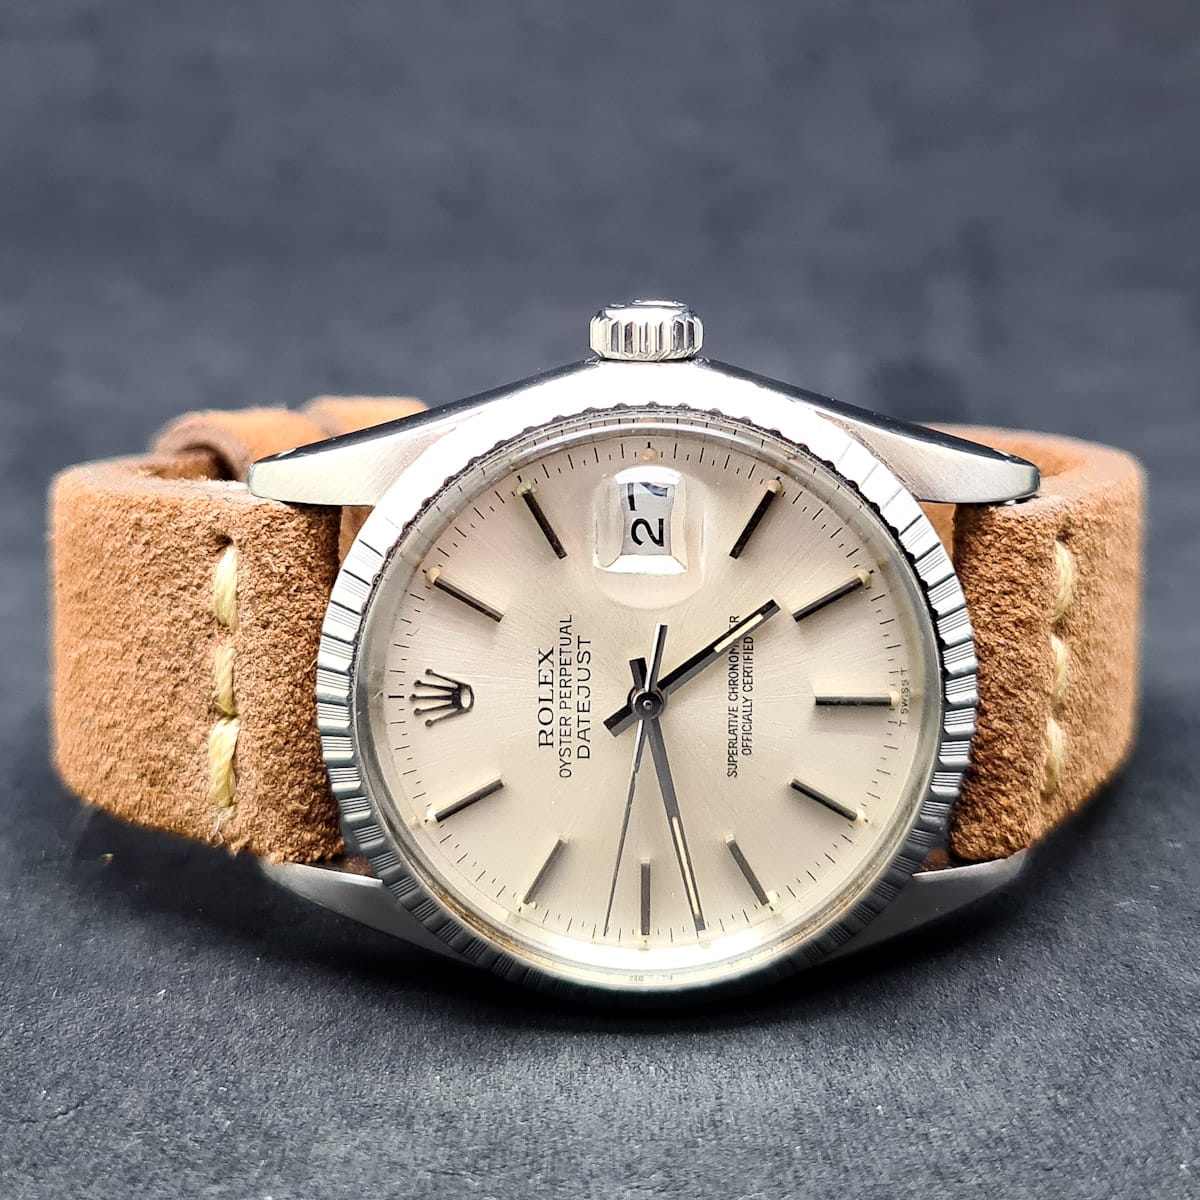 ROLEX OYSTER PERPETUAL DATEJUST - VINTAGE